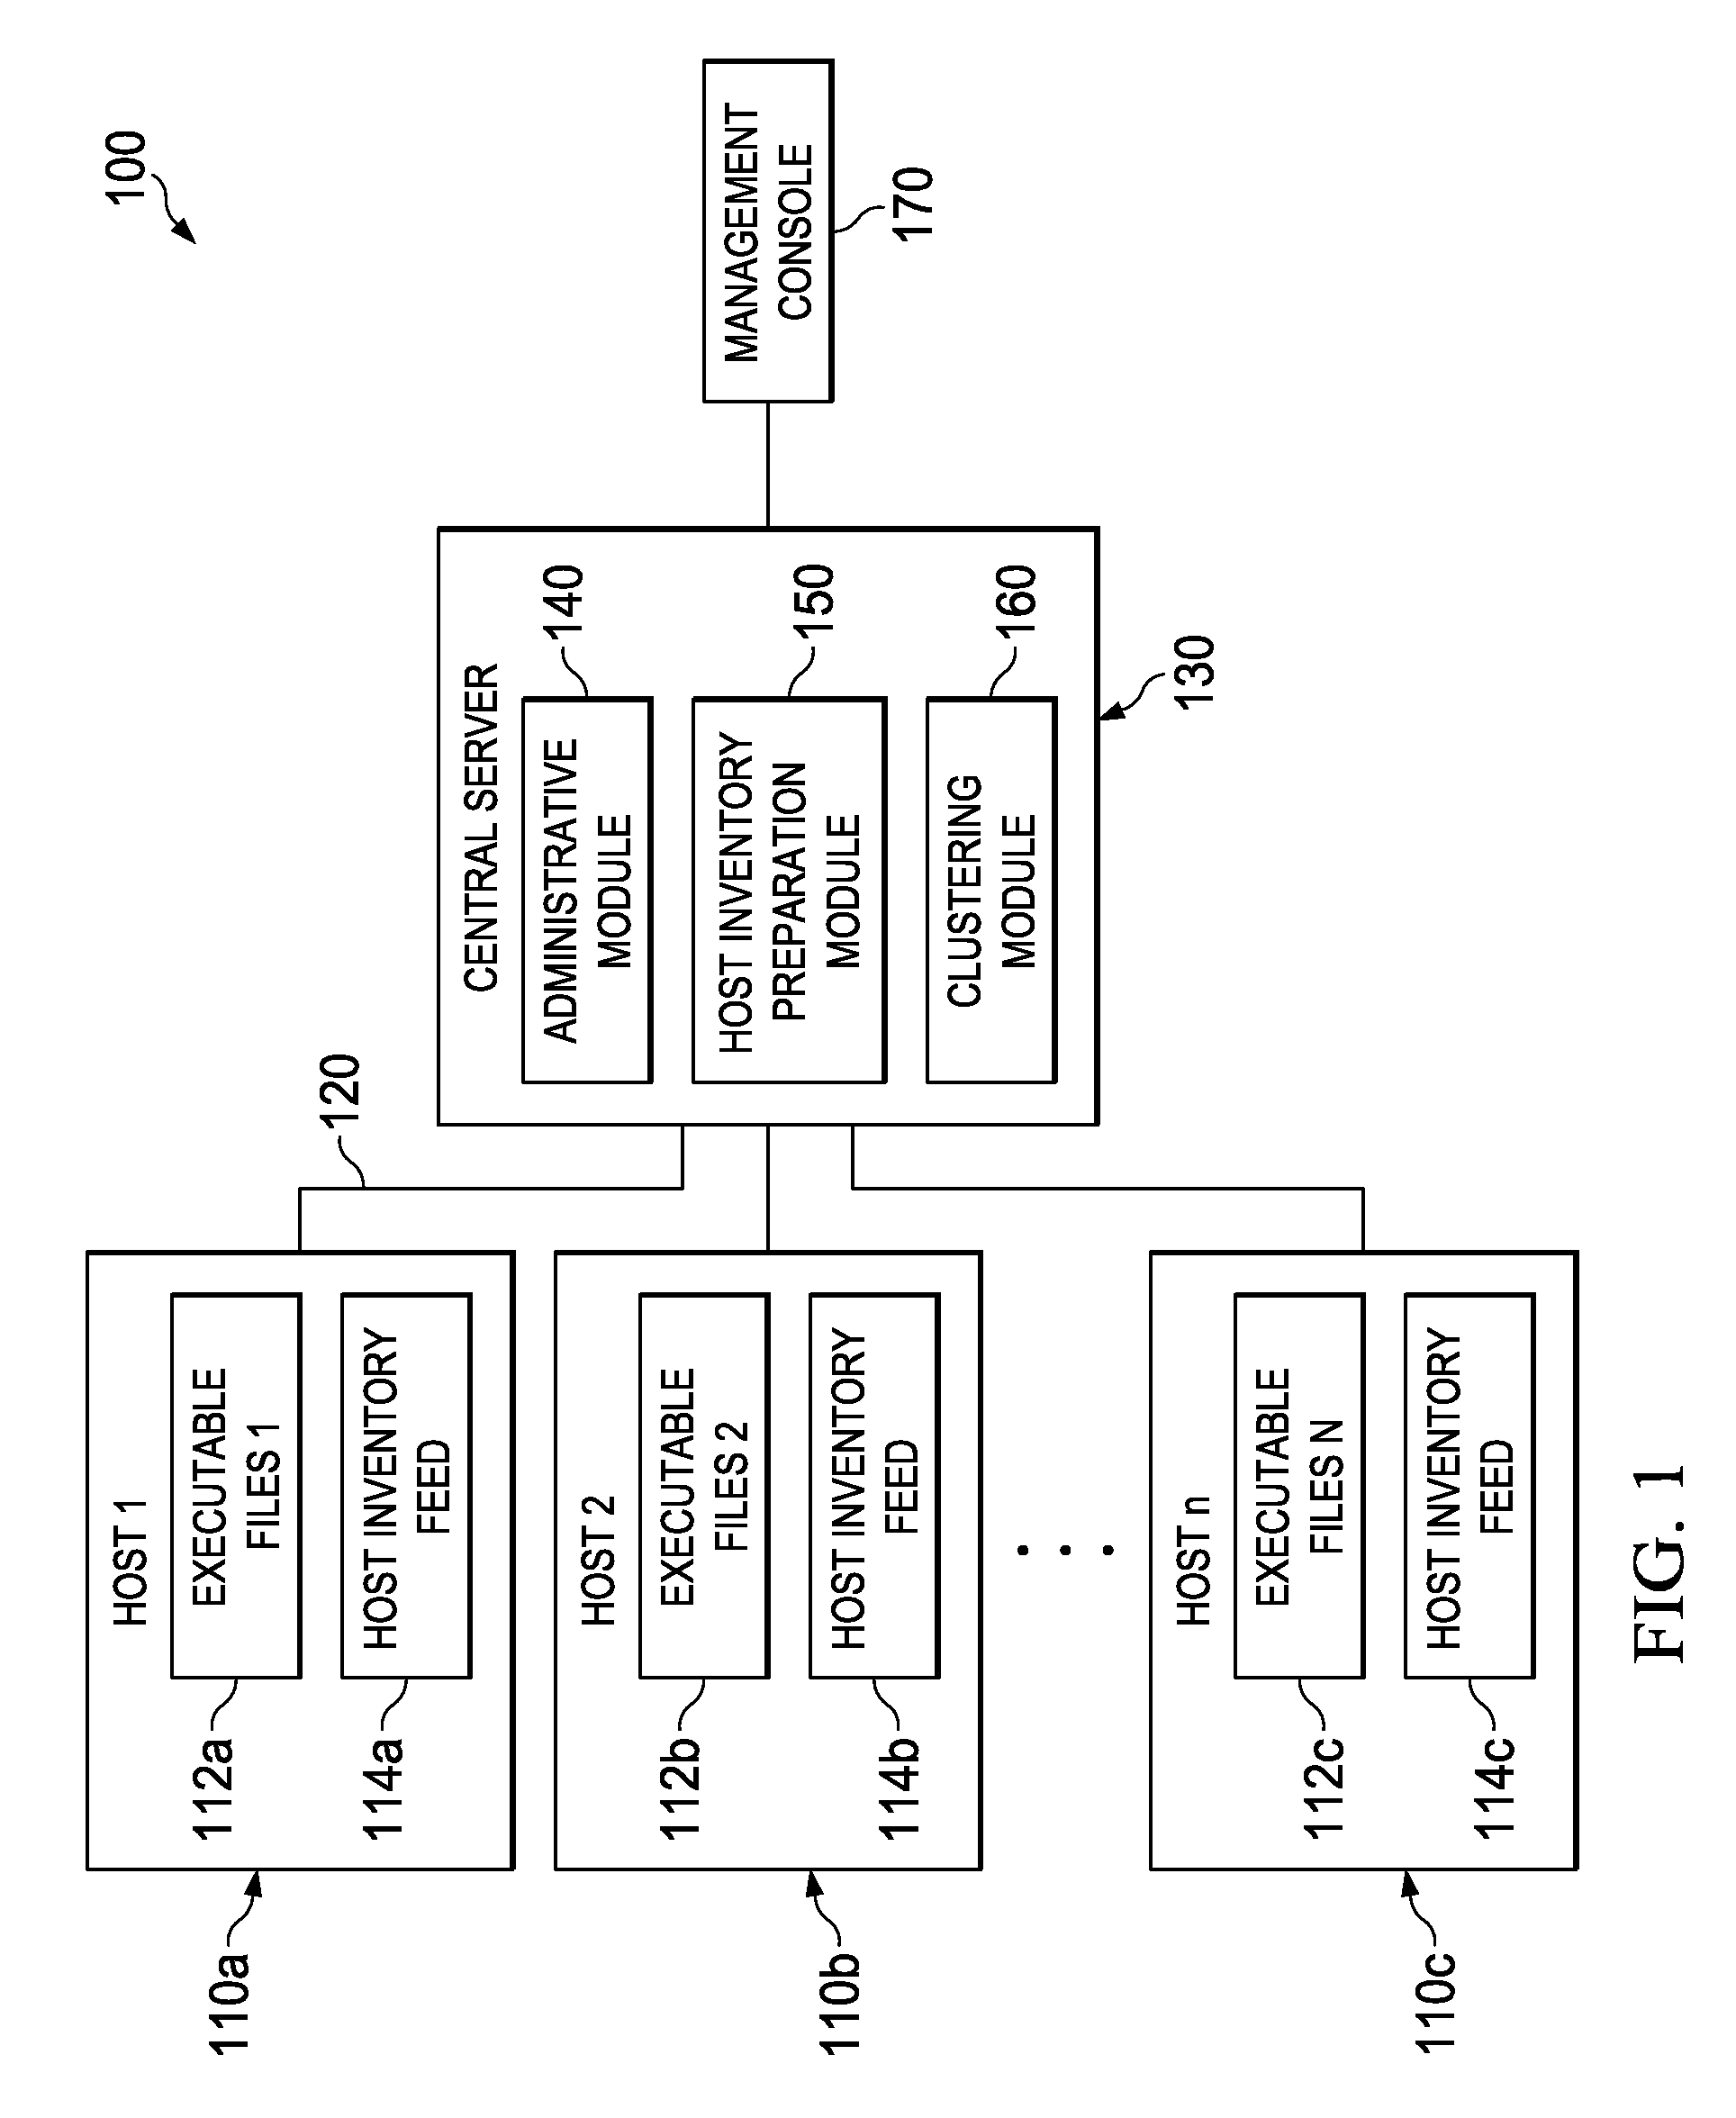 System and method for clustering host inventories